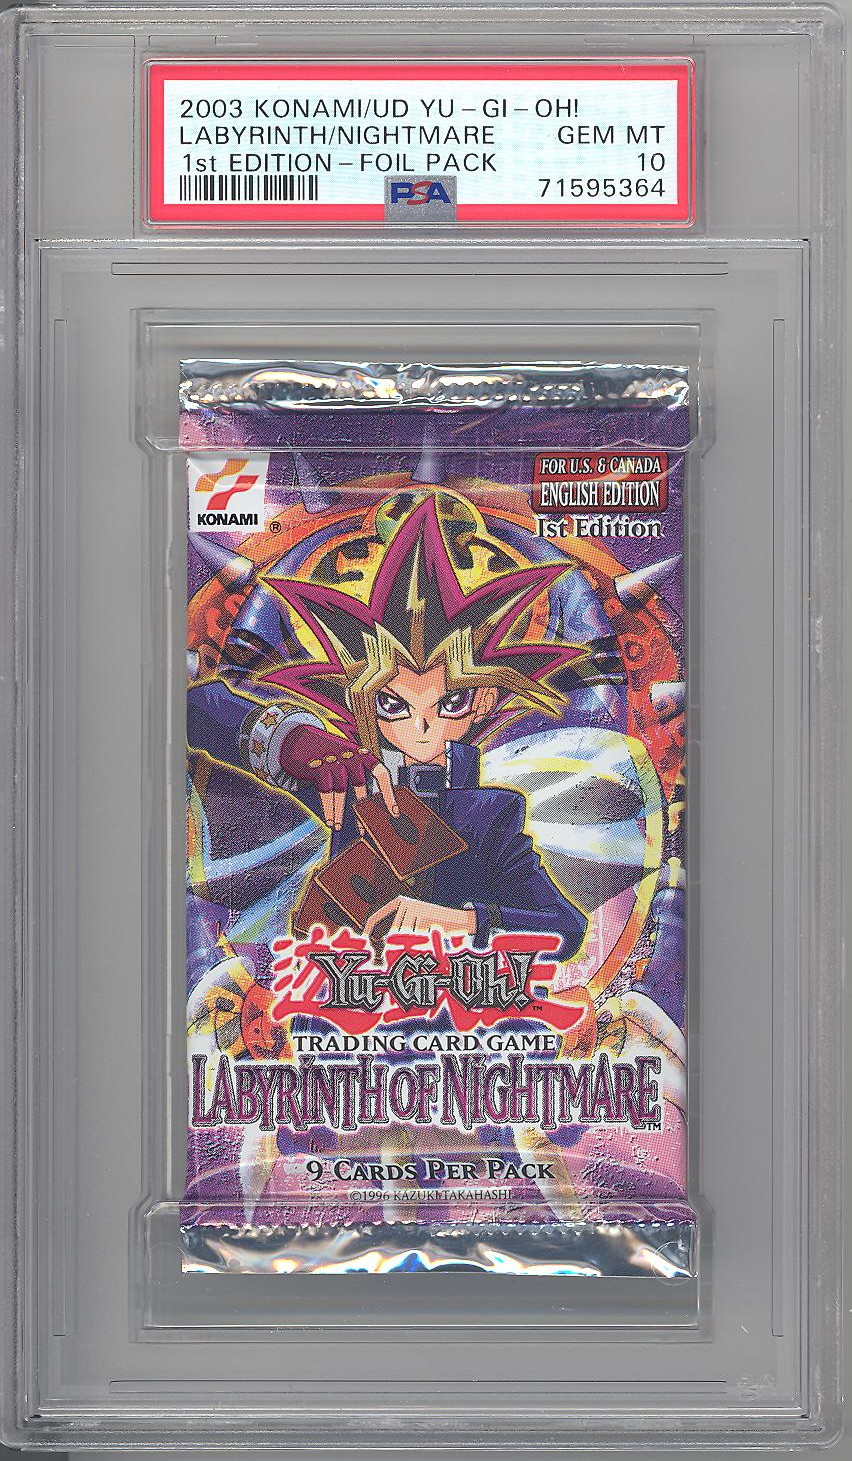 PSA 10 - Yu-Gi-Oh Cards - Labyrinth of Nightmare - Booster Pack (9 